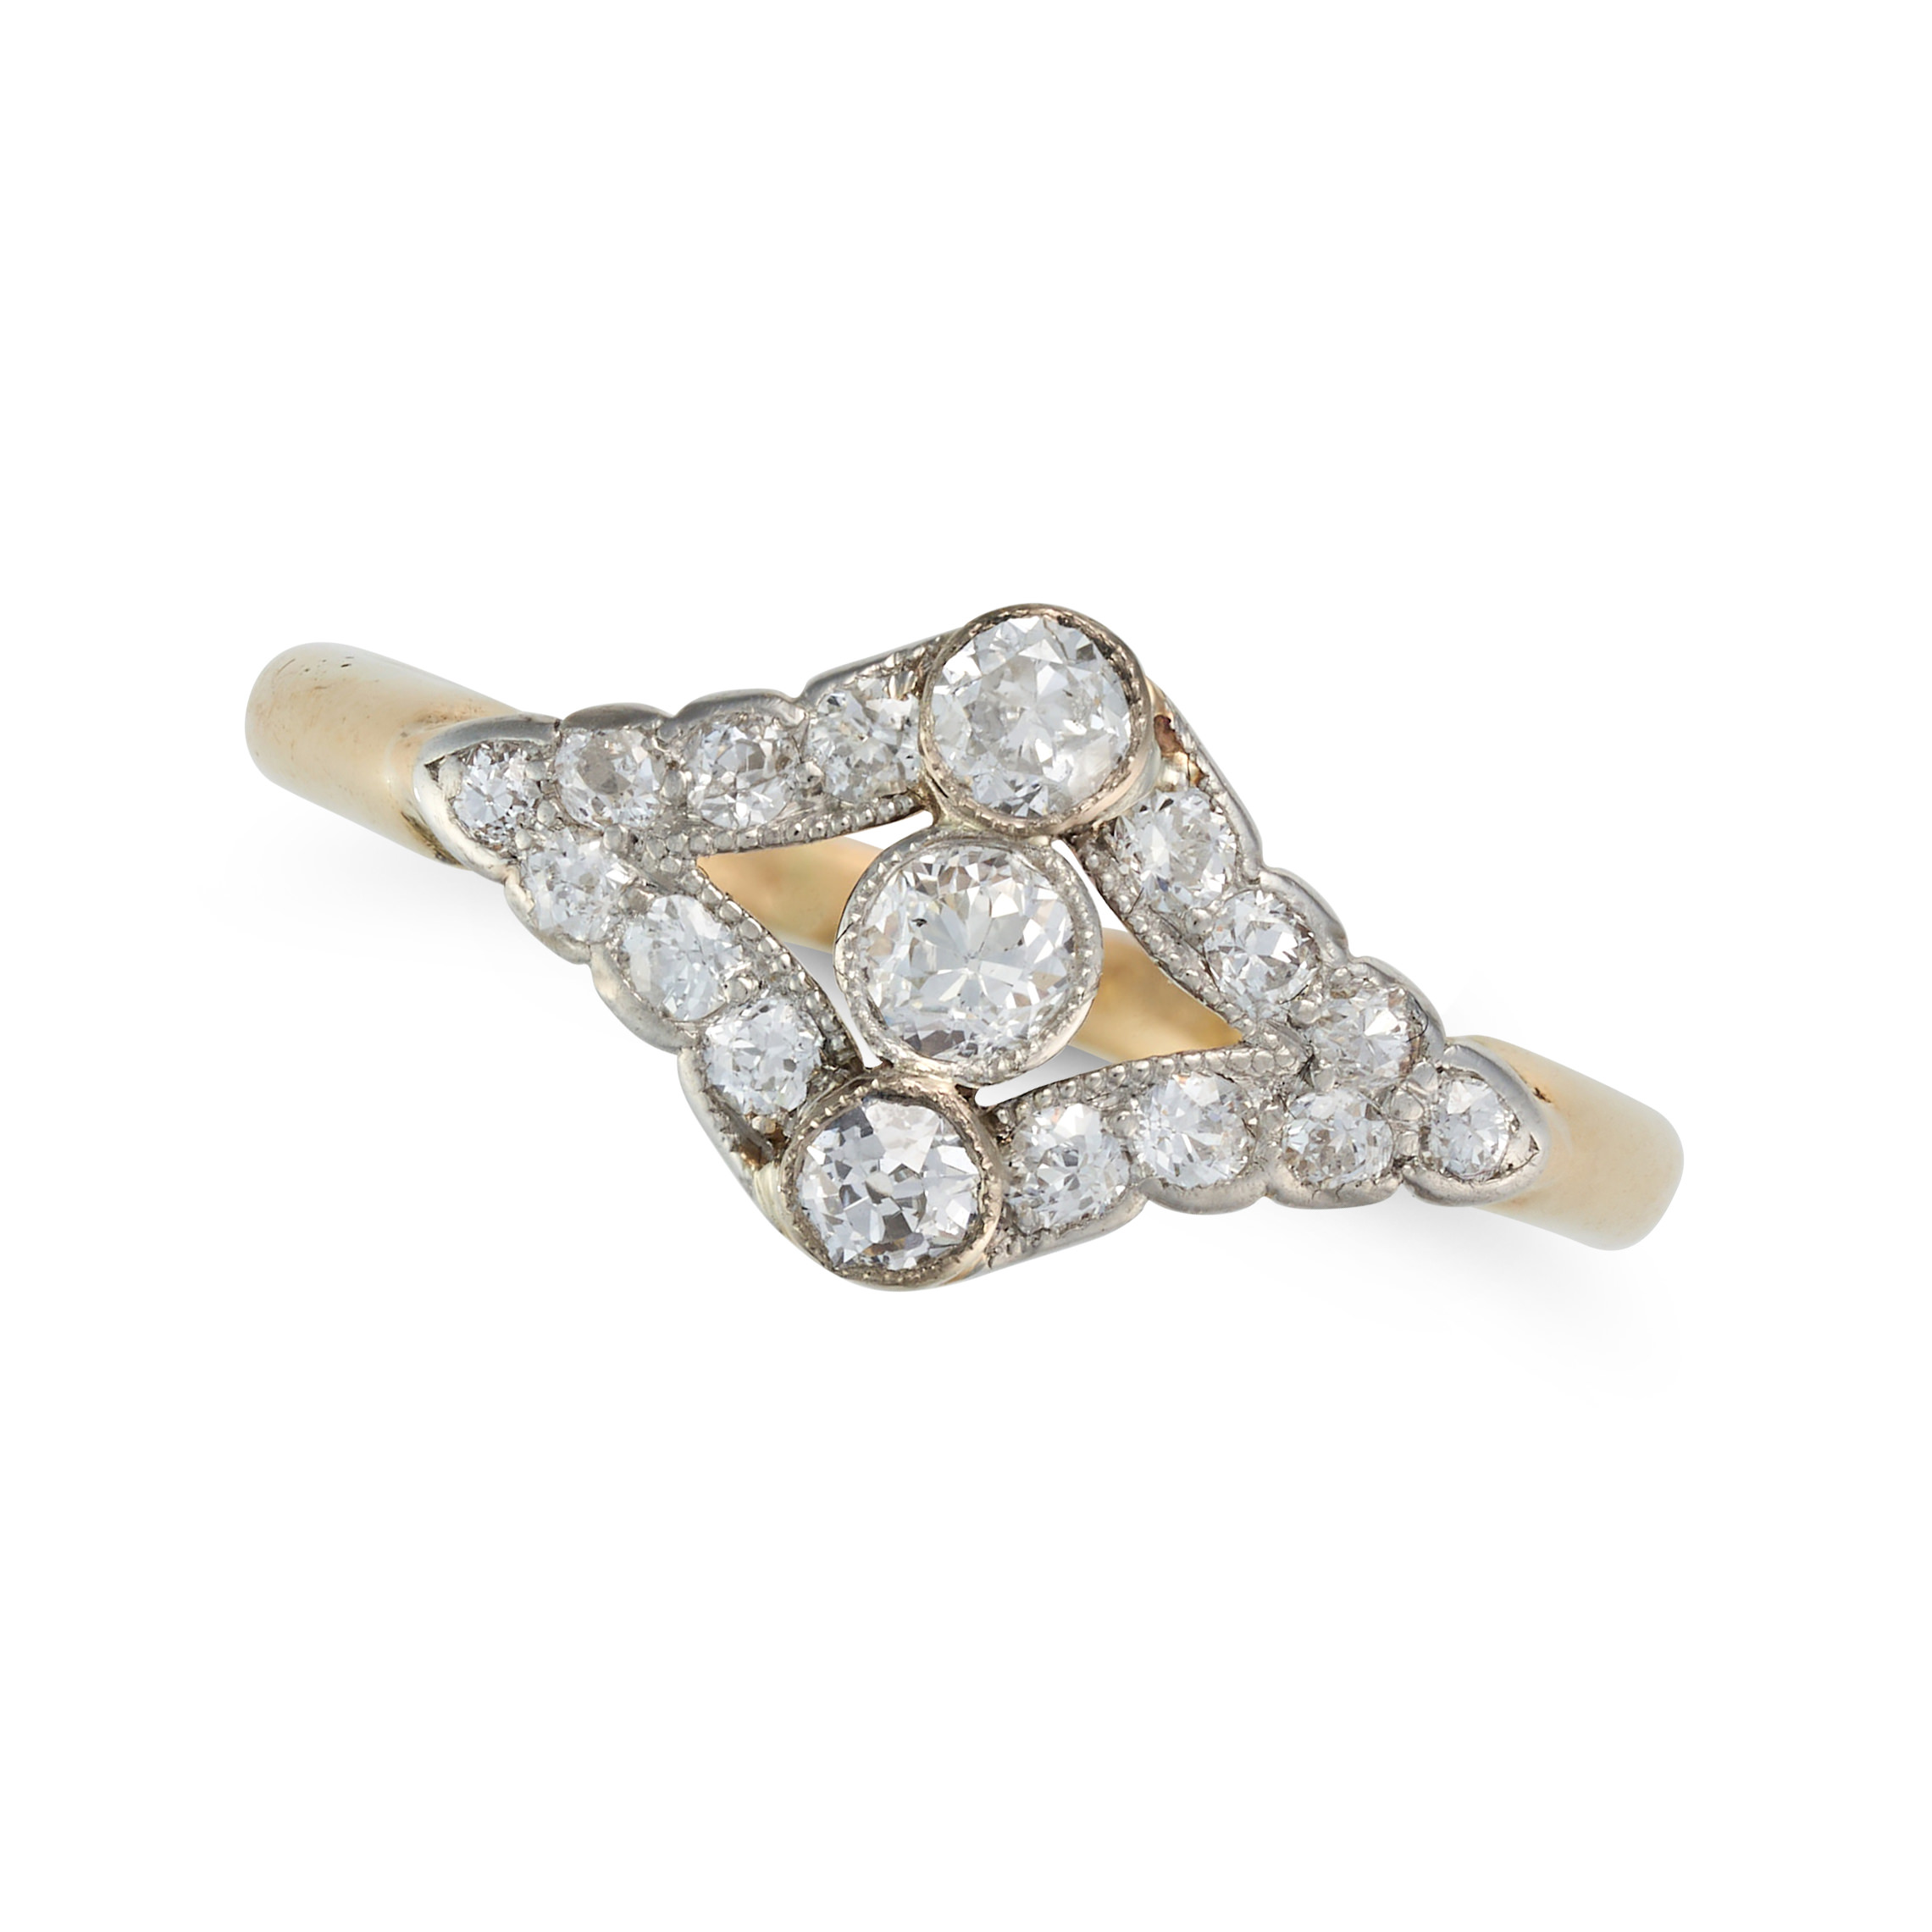 A DIAMOND DRESS RING set throughout with old cut diamonds, stamped 18CT, size K1/2 / 5.5, 2.5g.